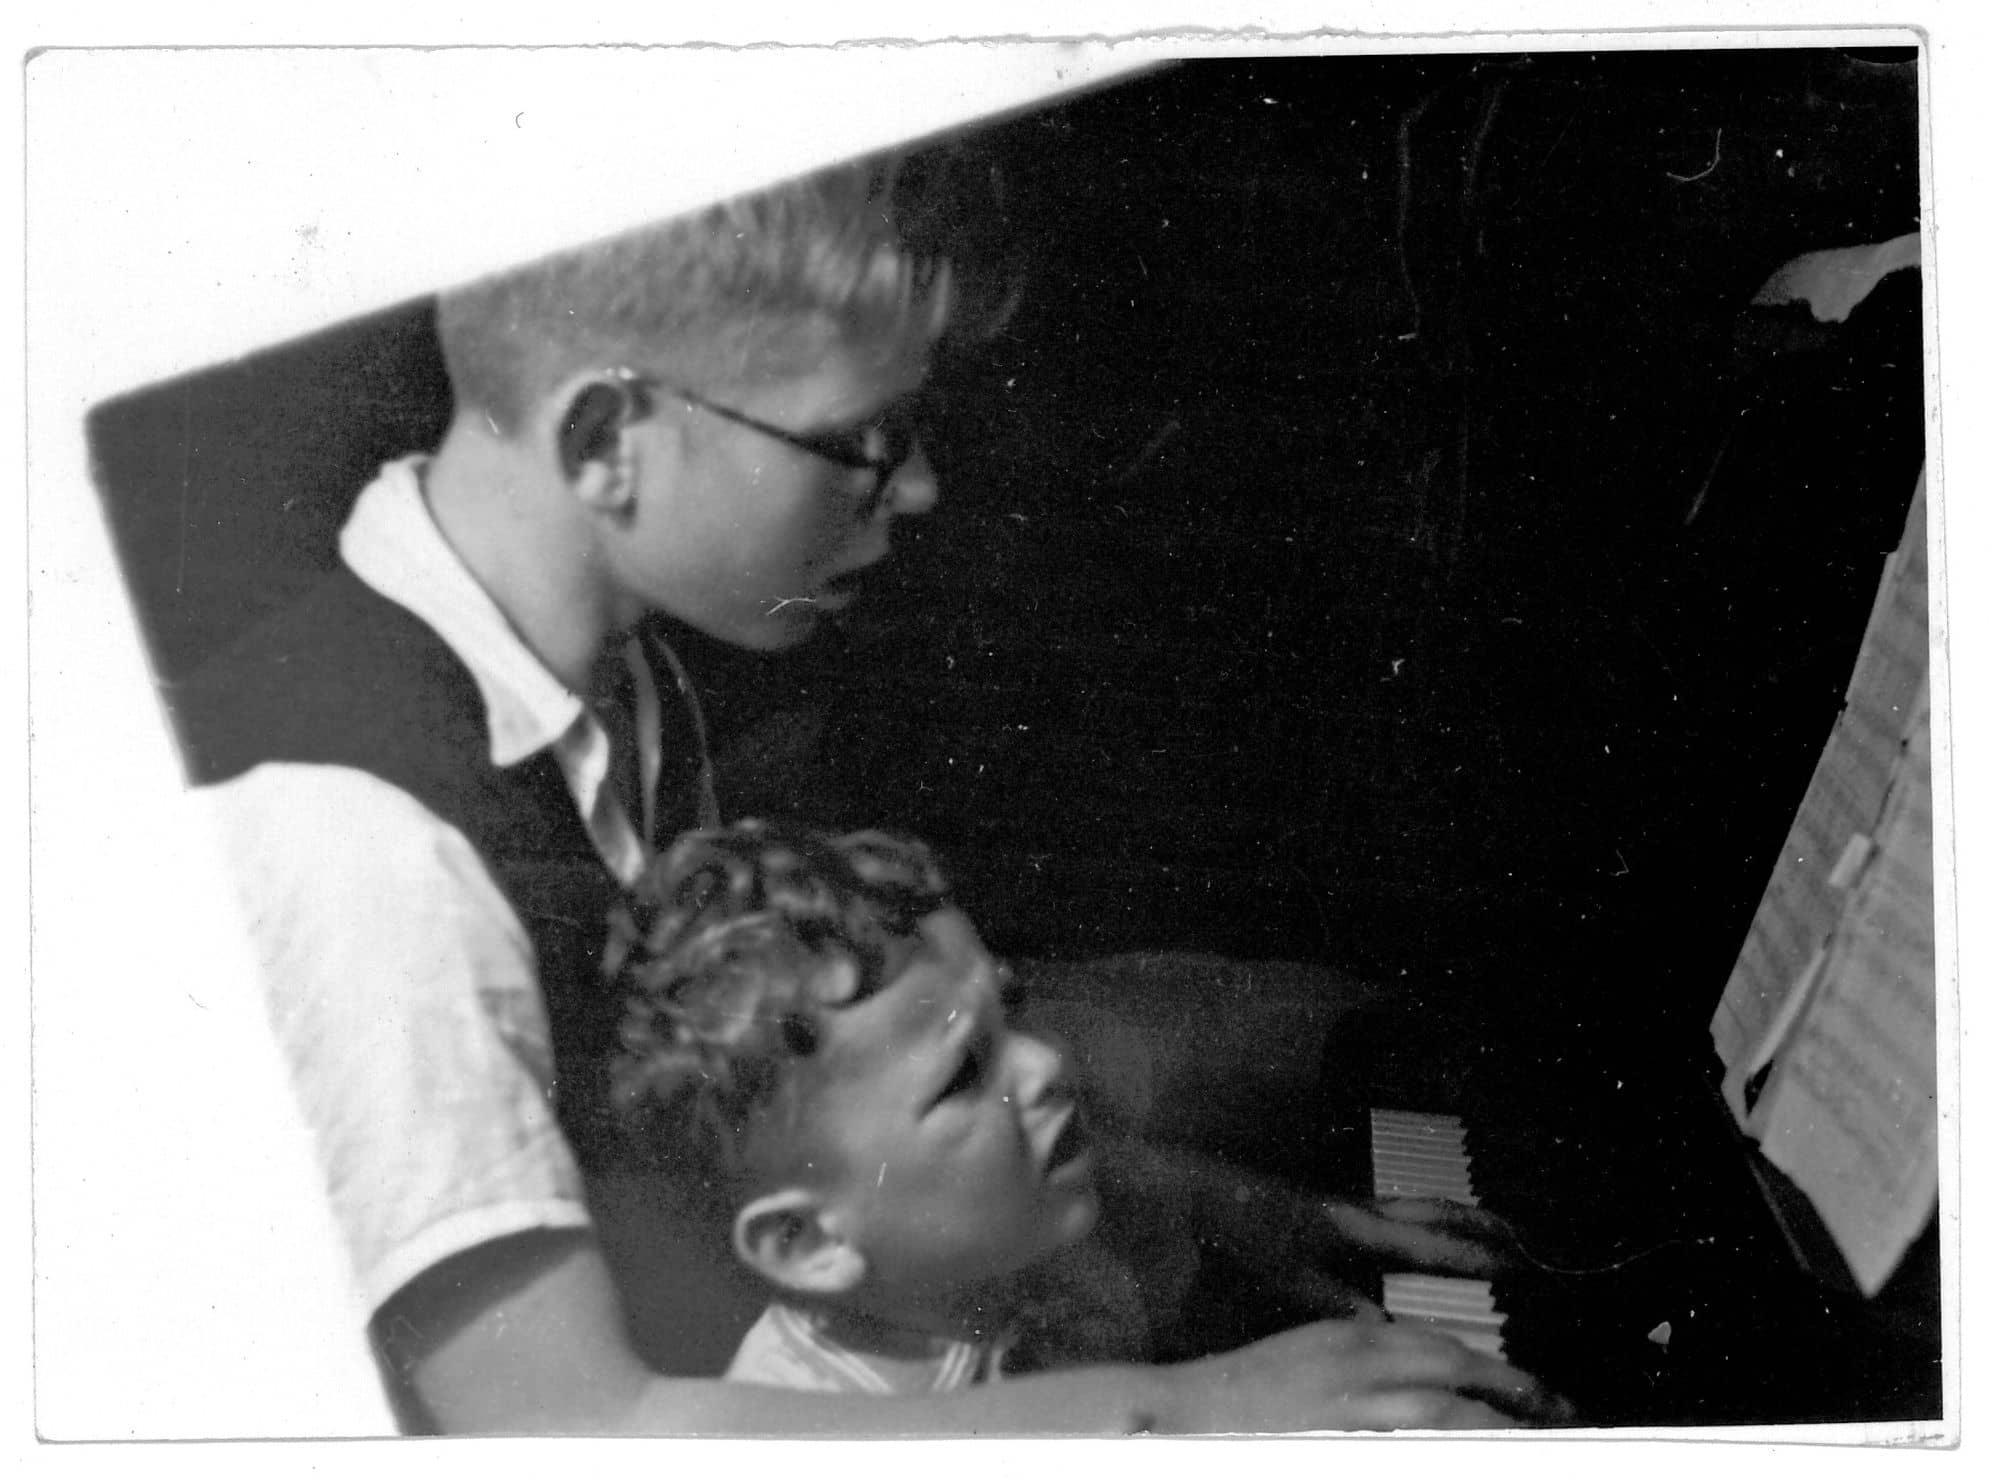 Rescued Lode Frank Jut singing with the Schaafsma's son, Rescued Lode Frank singing with the Schaafsma's son